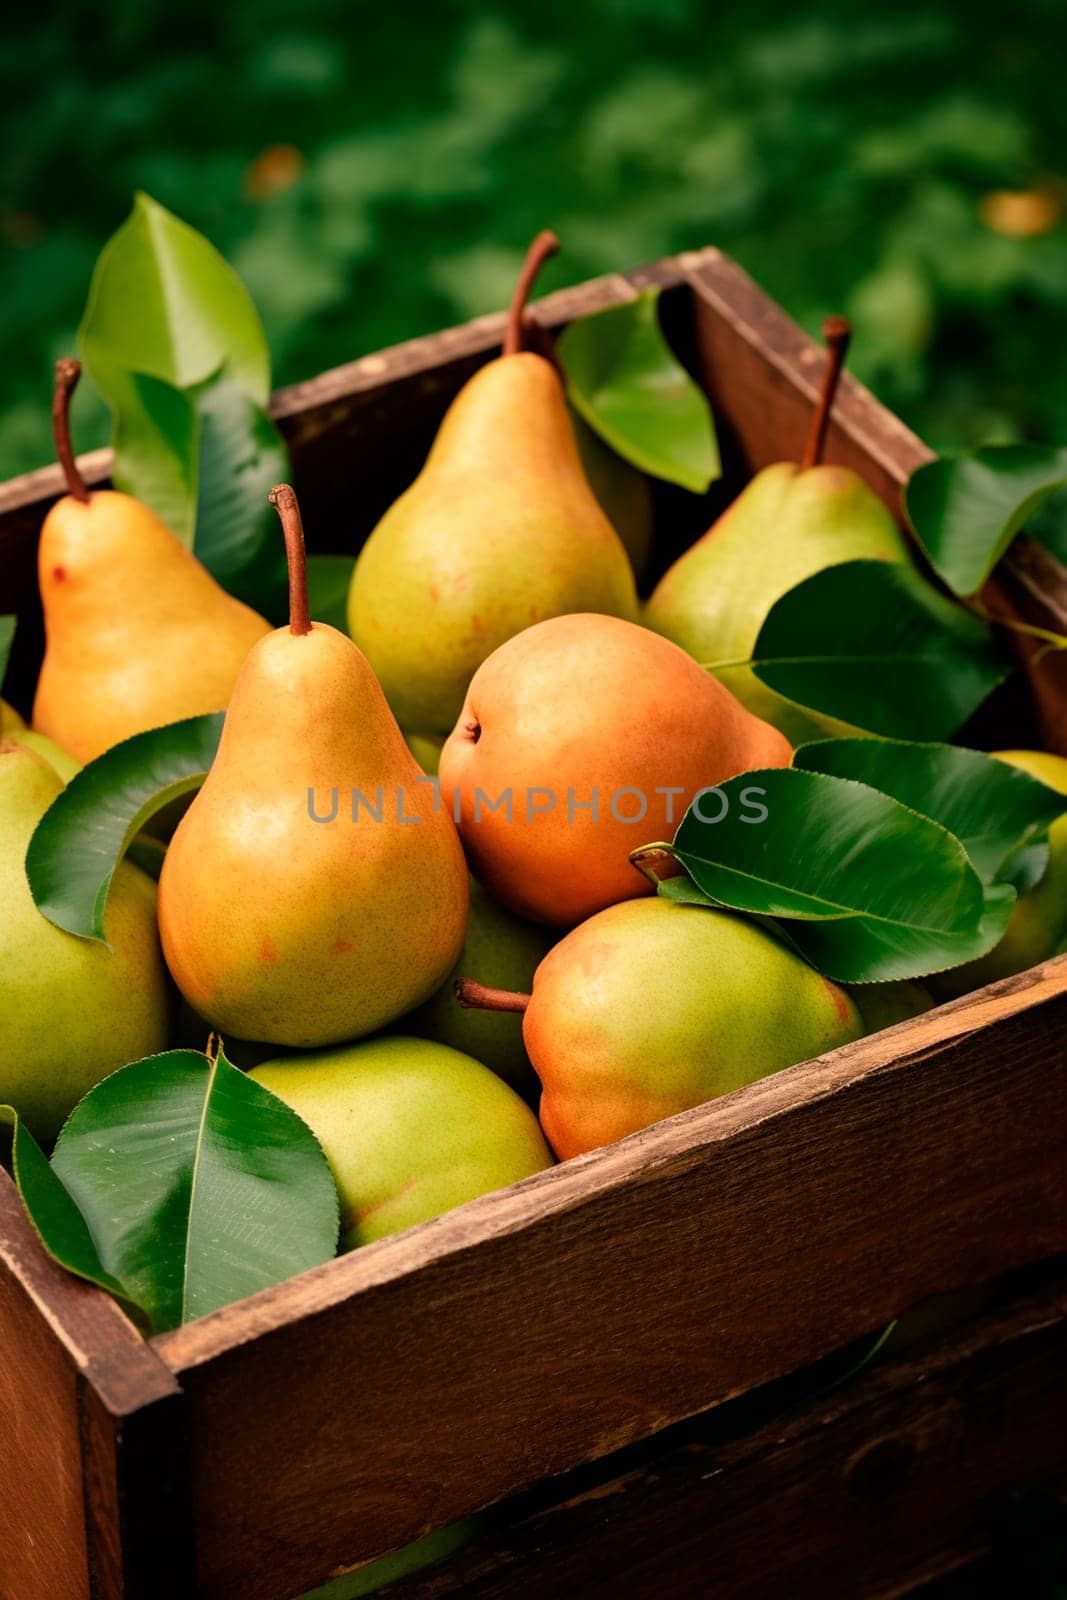 Pear harvest in a box in the garden. Selective focus. Food.